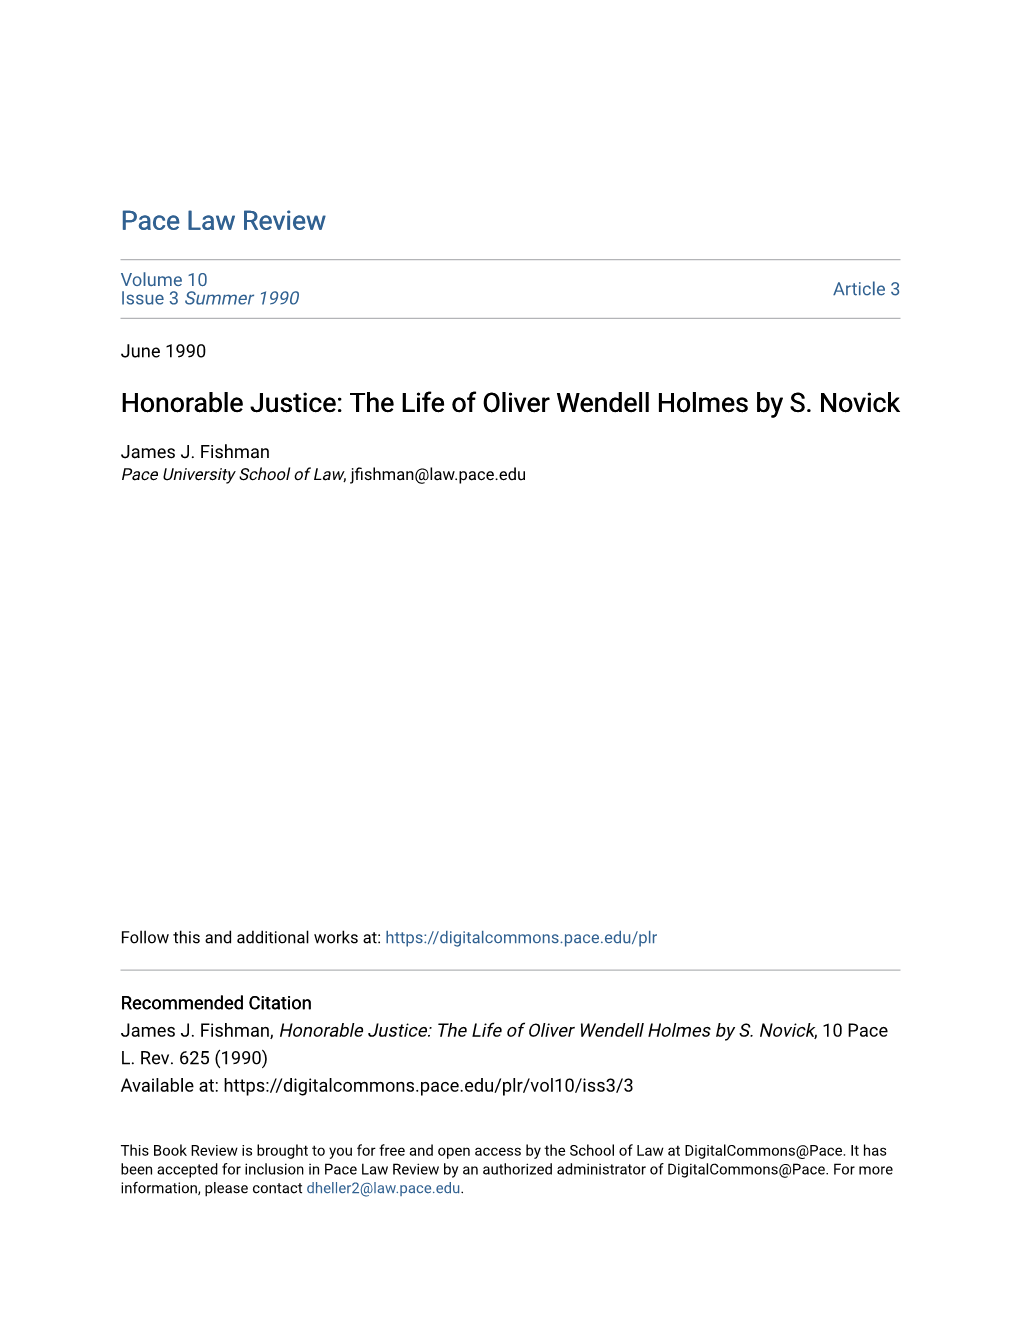 Honorable Justice: the Life of Oliver Wendell Holmes by S. Novick